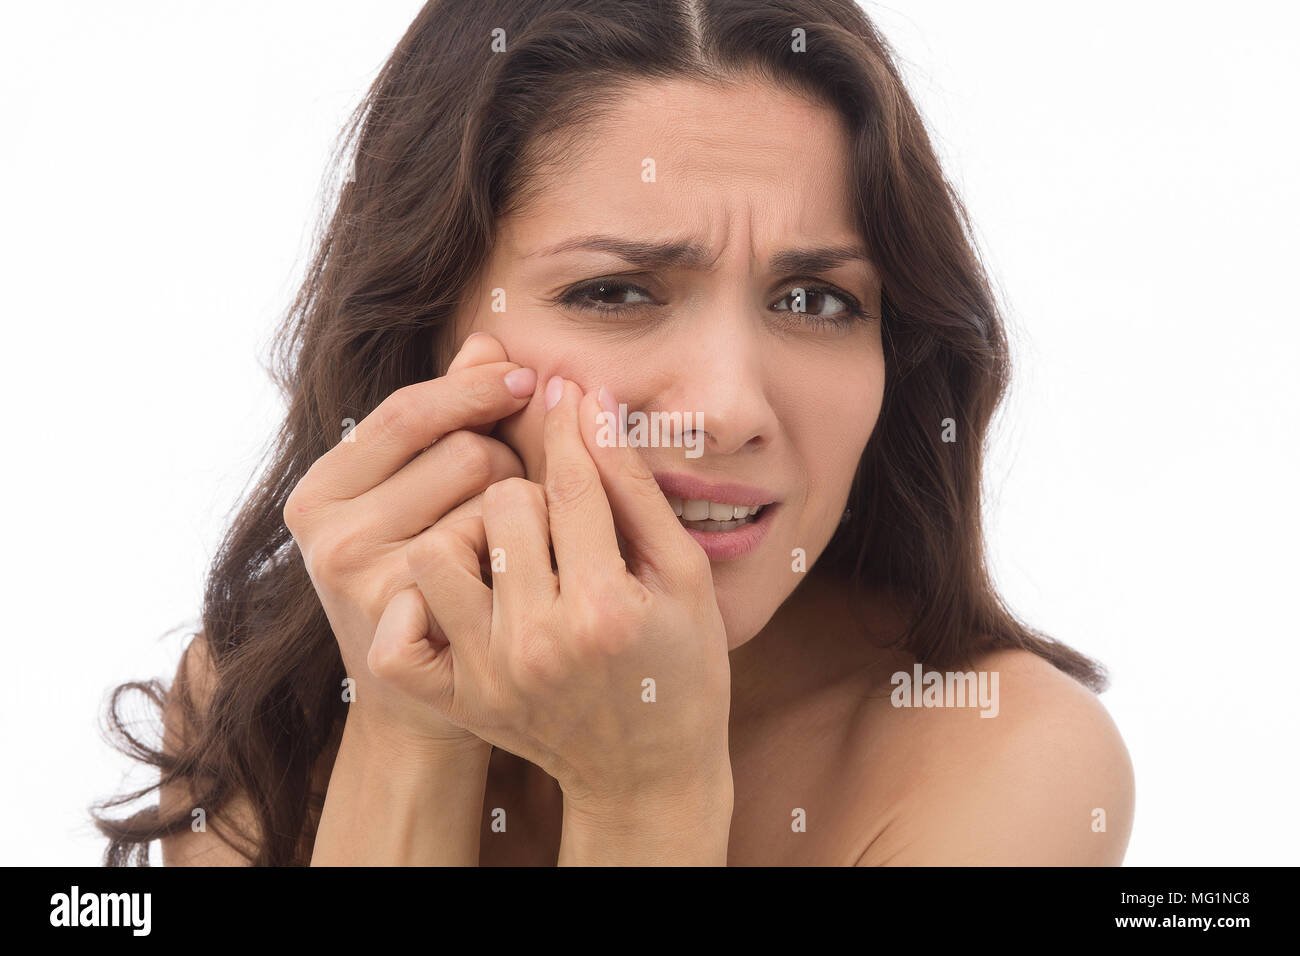 Portrait of an angry brunette woman Stock Photo